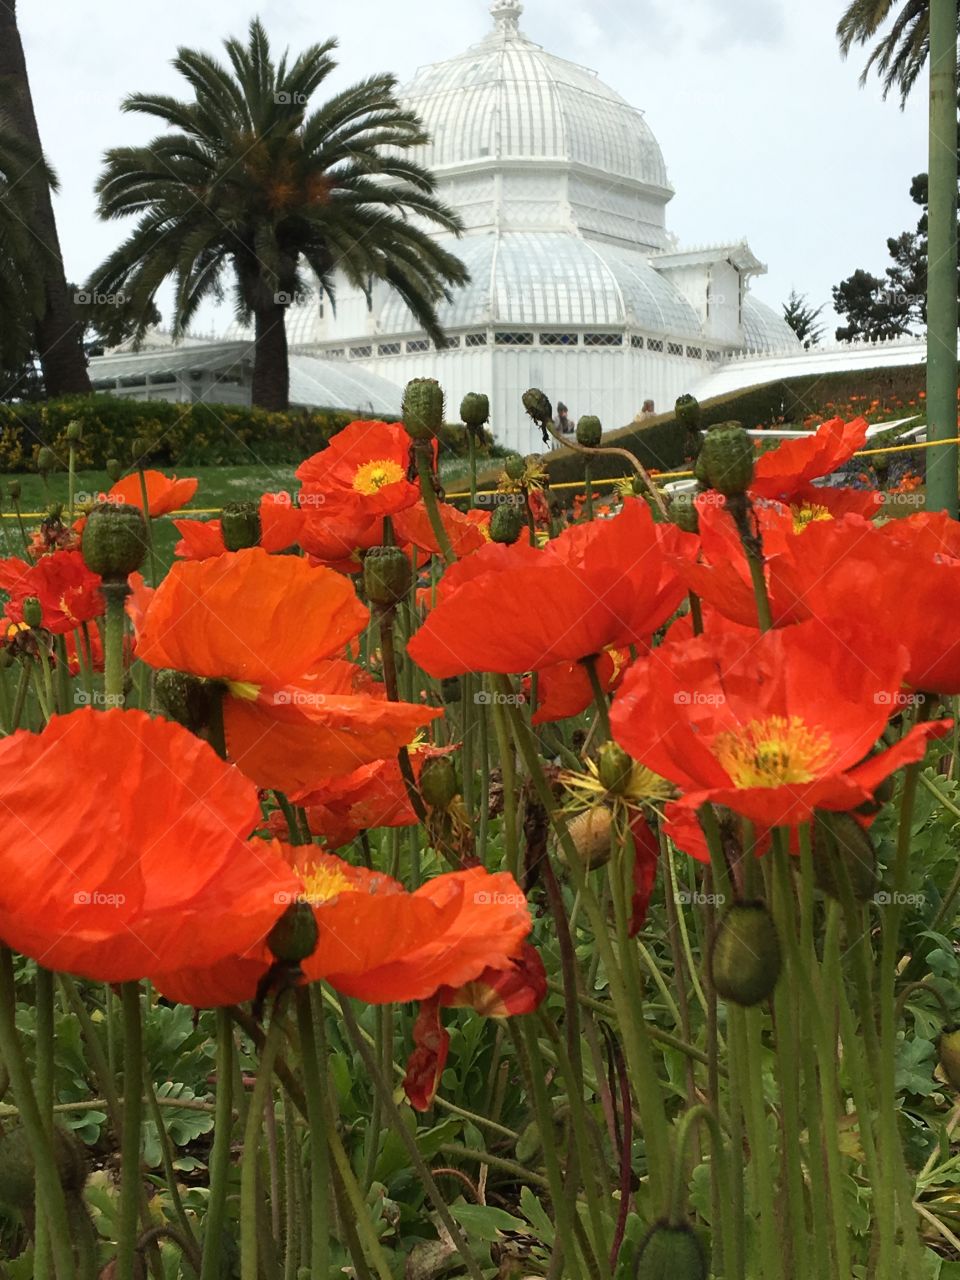 Red Iceland Poppies in front of the Conservatory of Flowers | San Francisco, CA